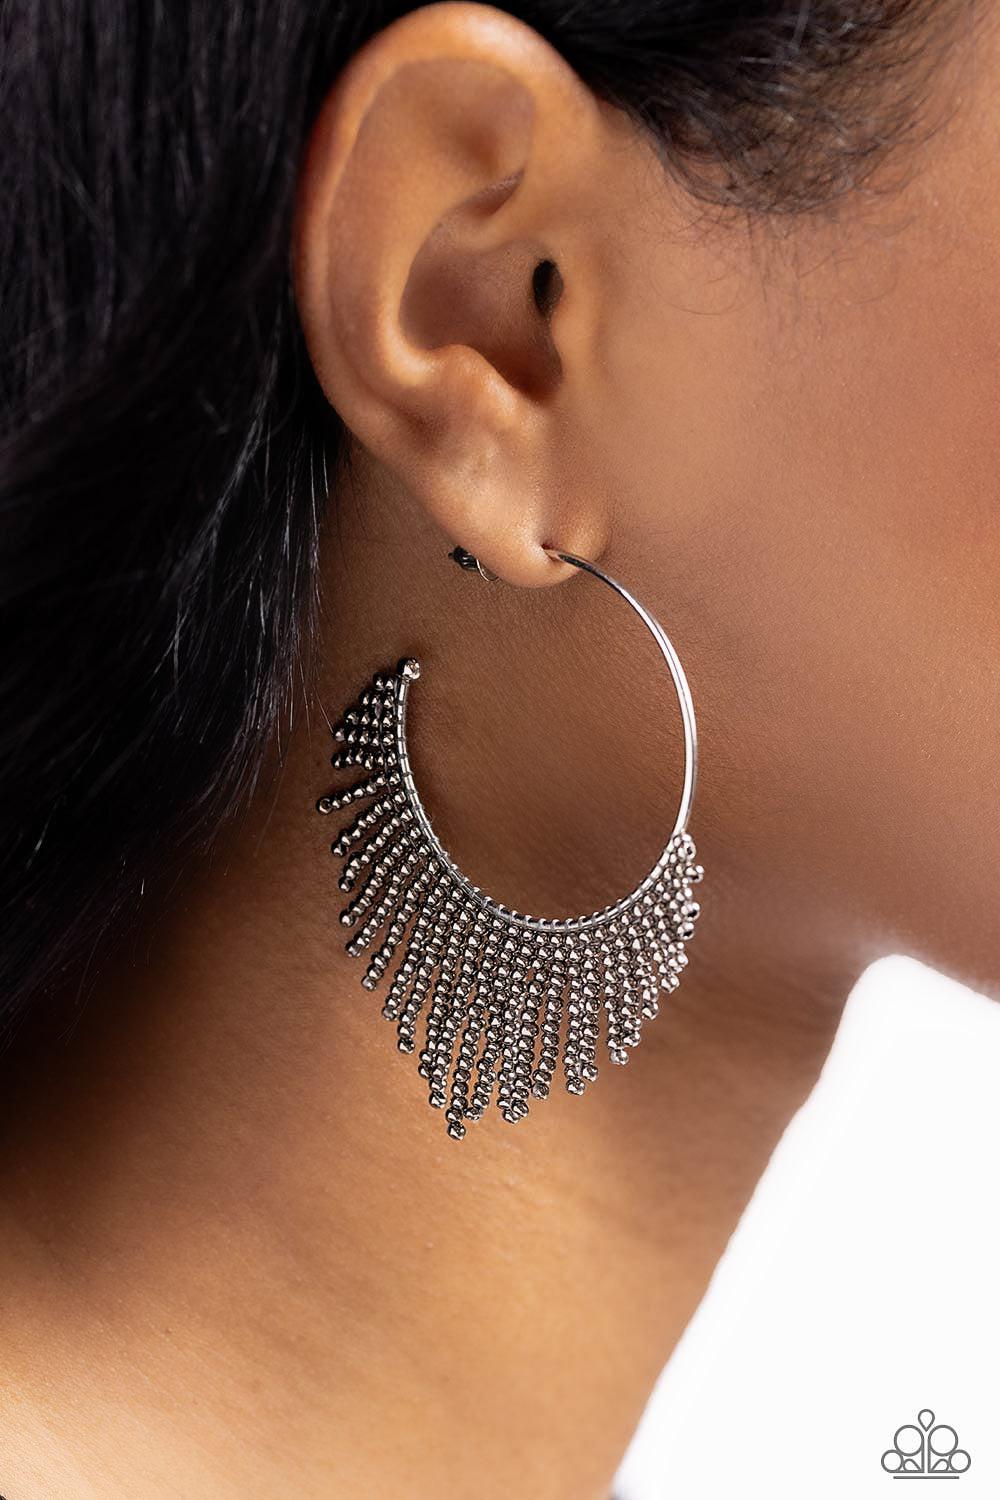 Tailored Tassel Silver Hoop Earrings - Paparazzi Accessories-on model - CarasShop.com - $5 Jewelry by Cara Jewels